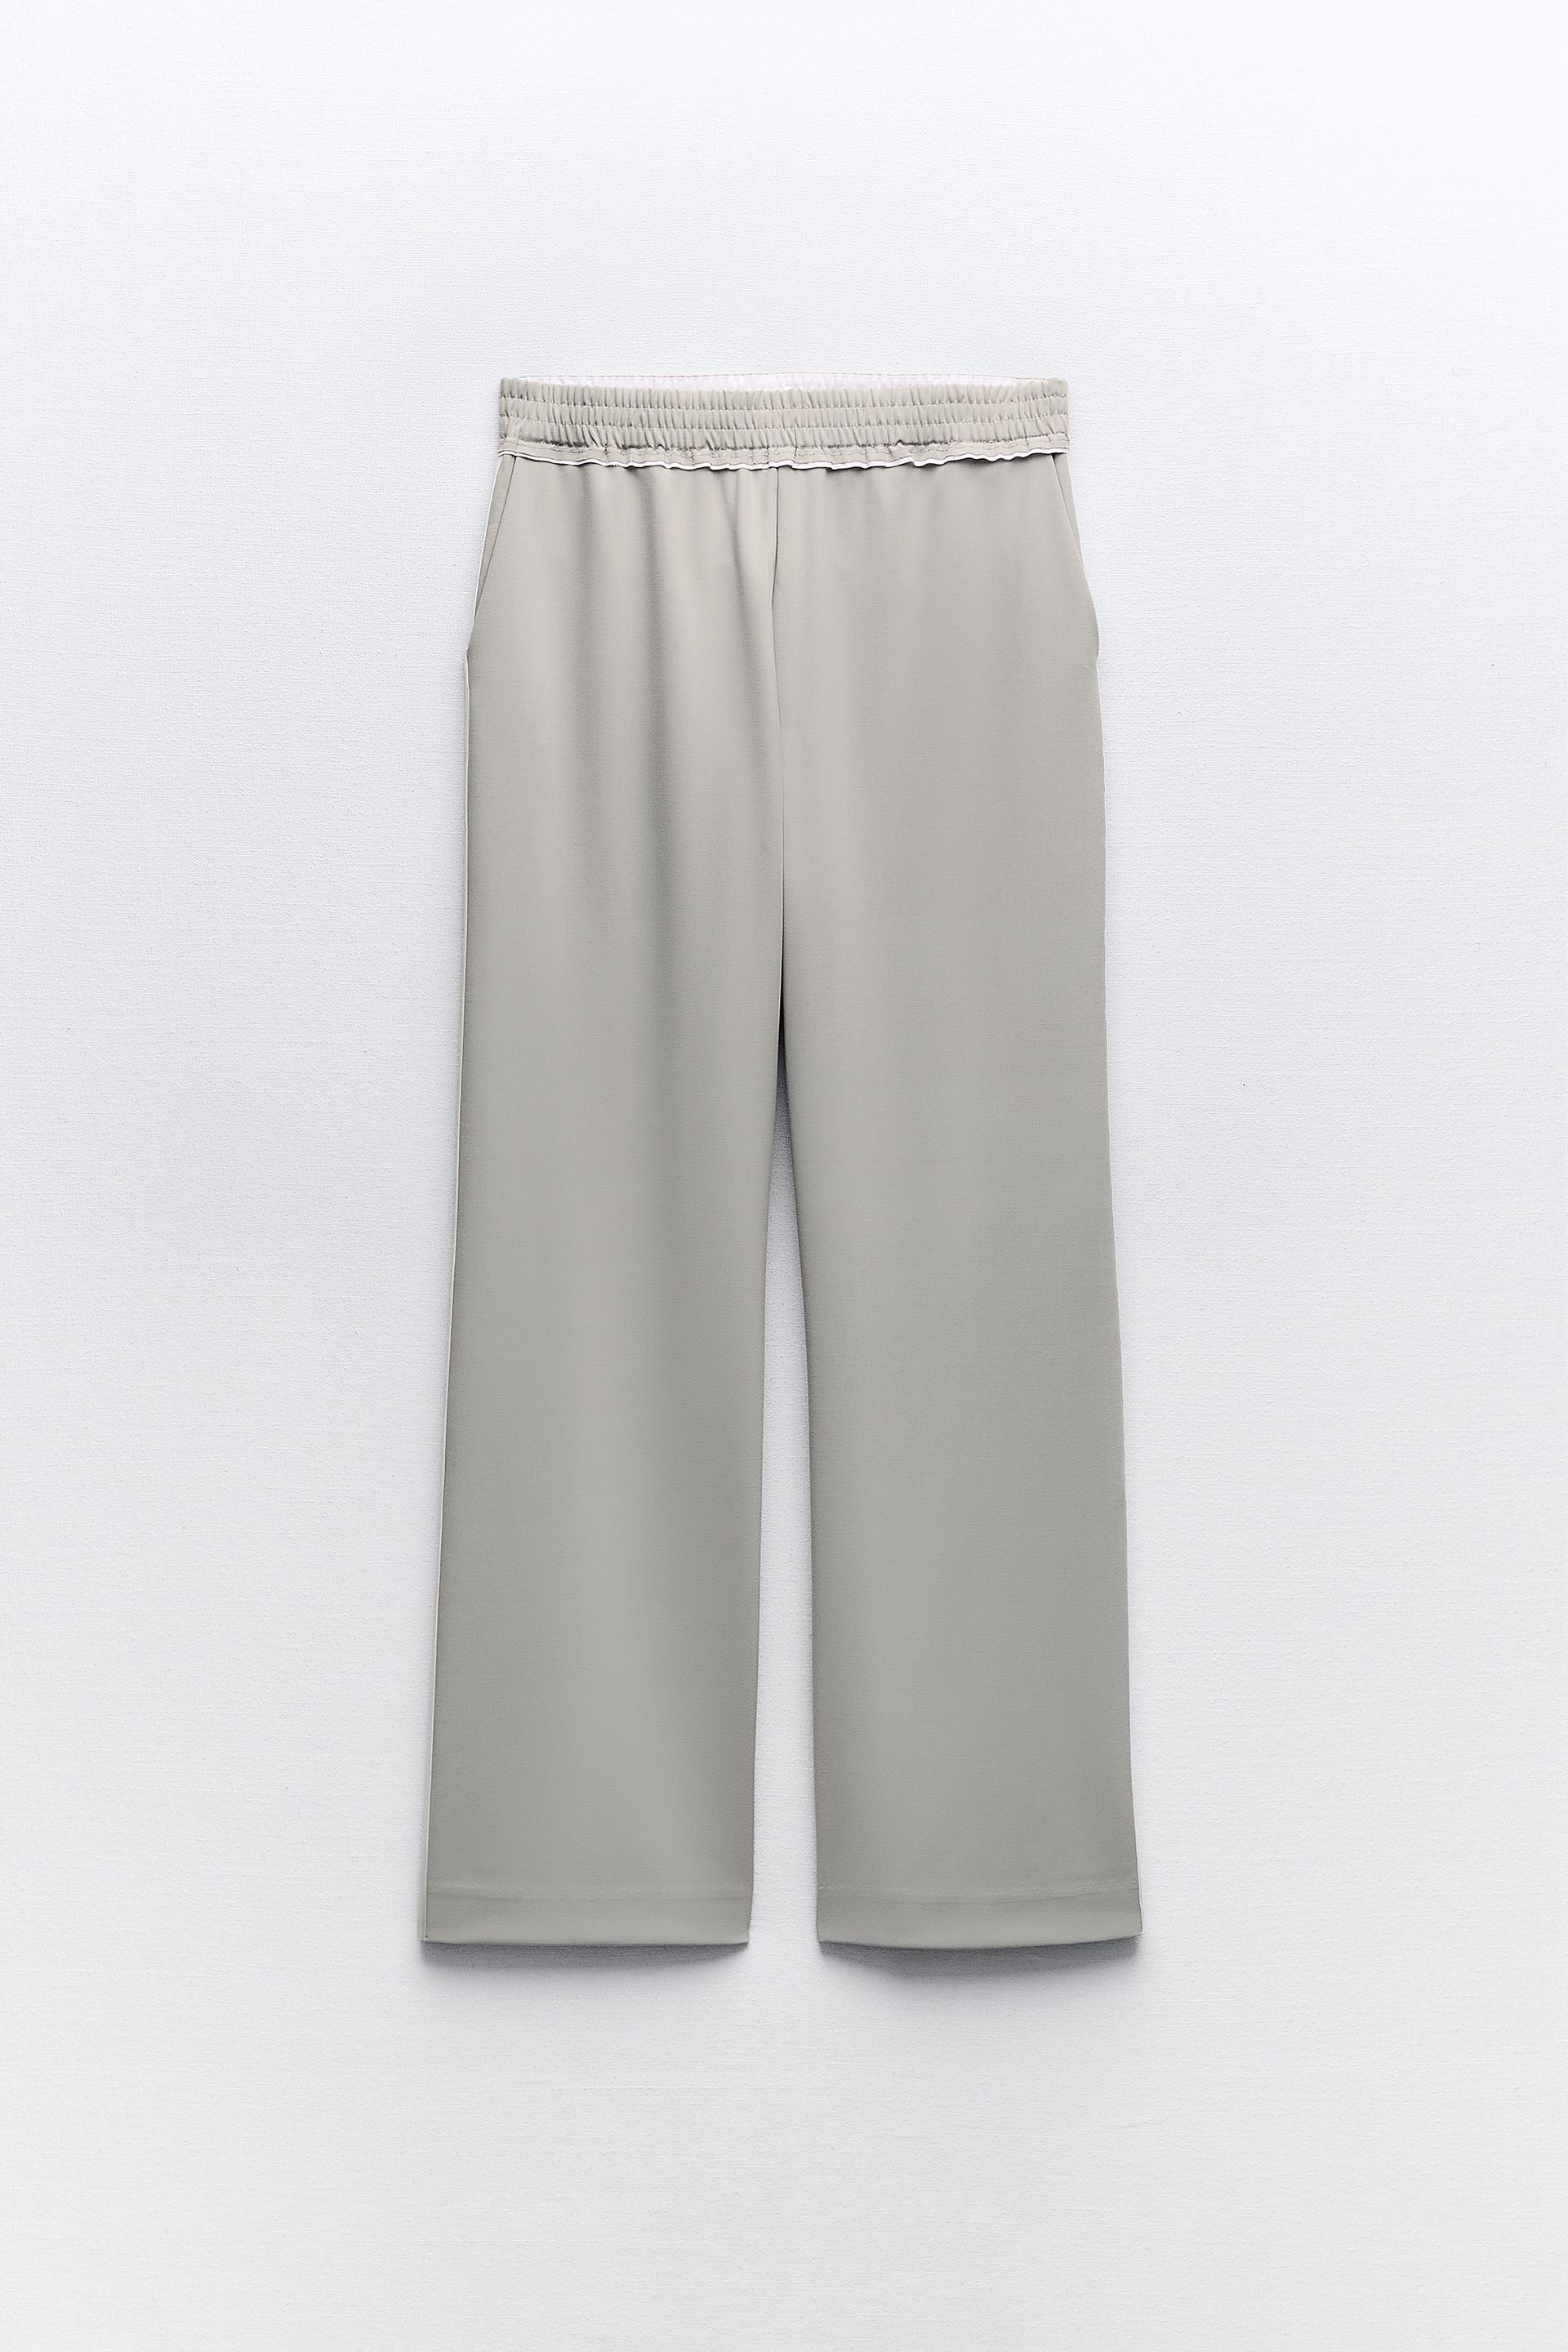 zara technical trousers with taping｜TikTok Search